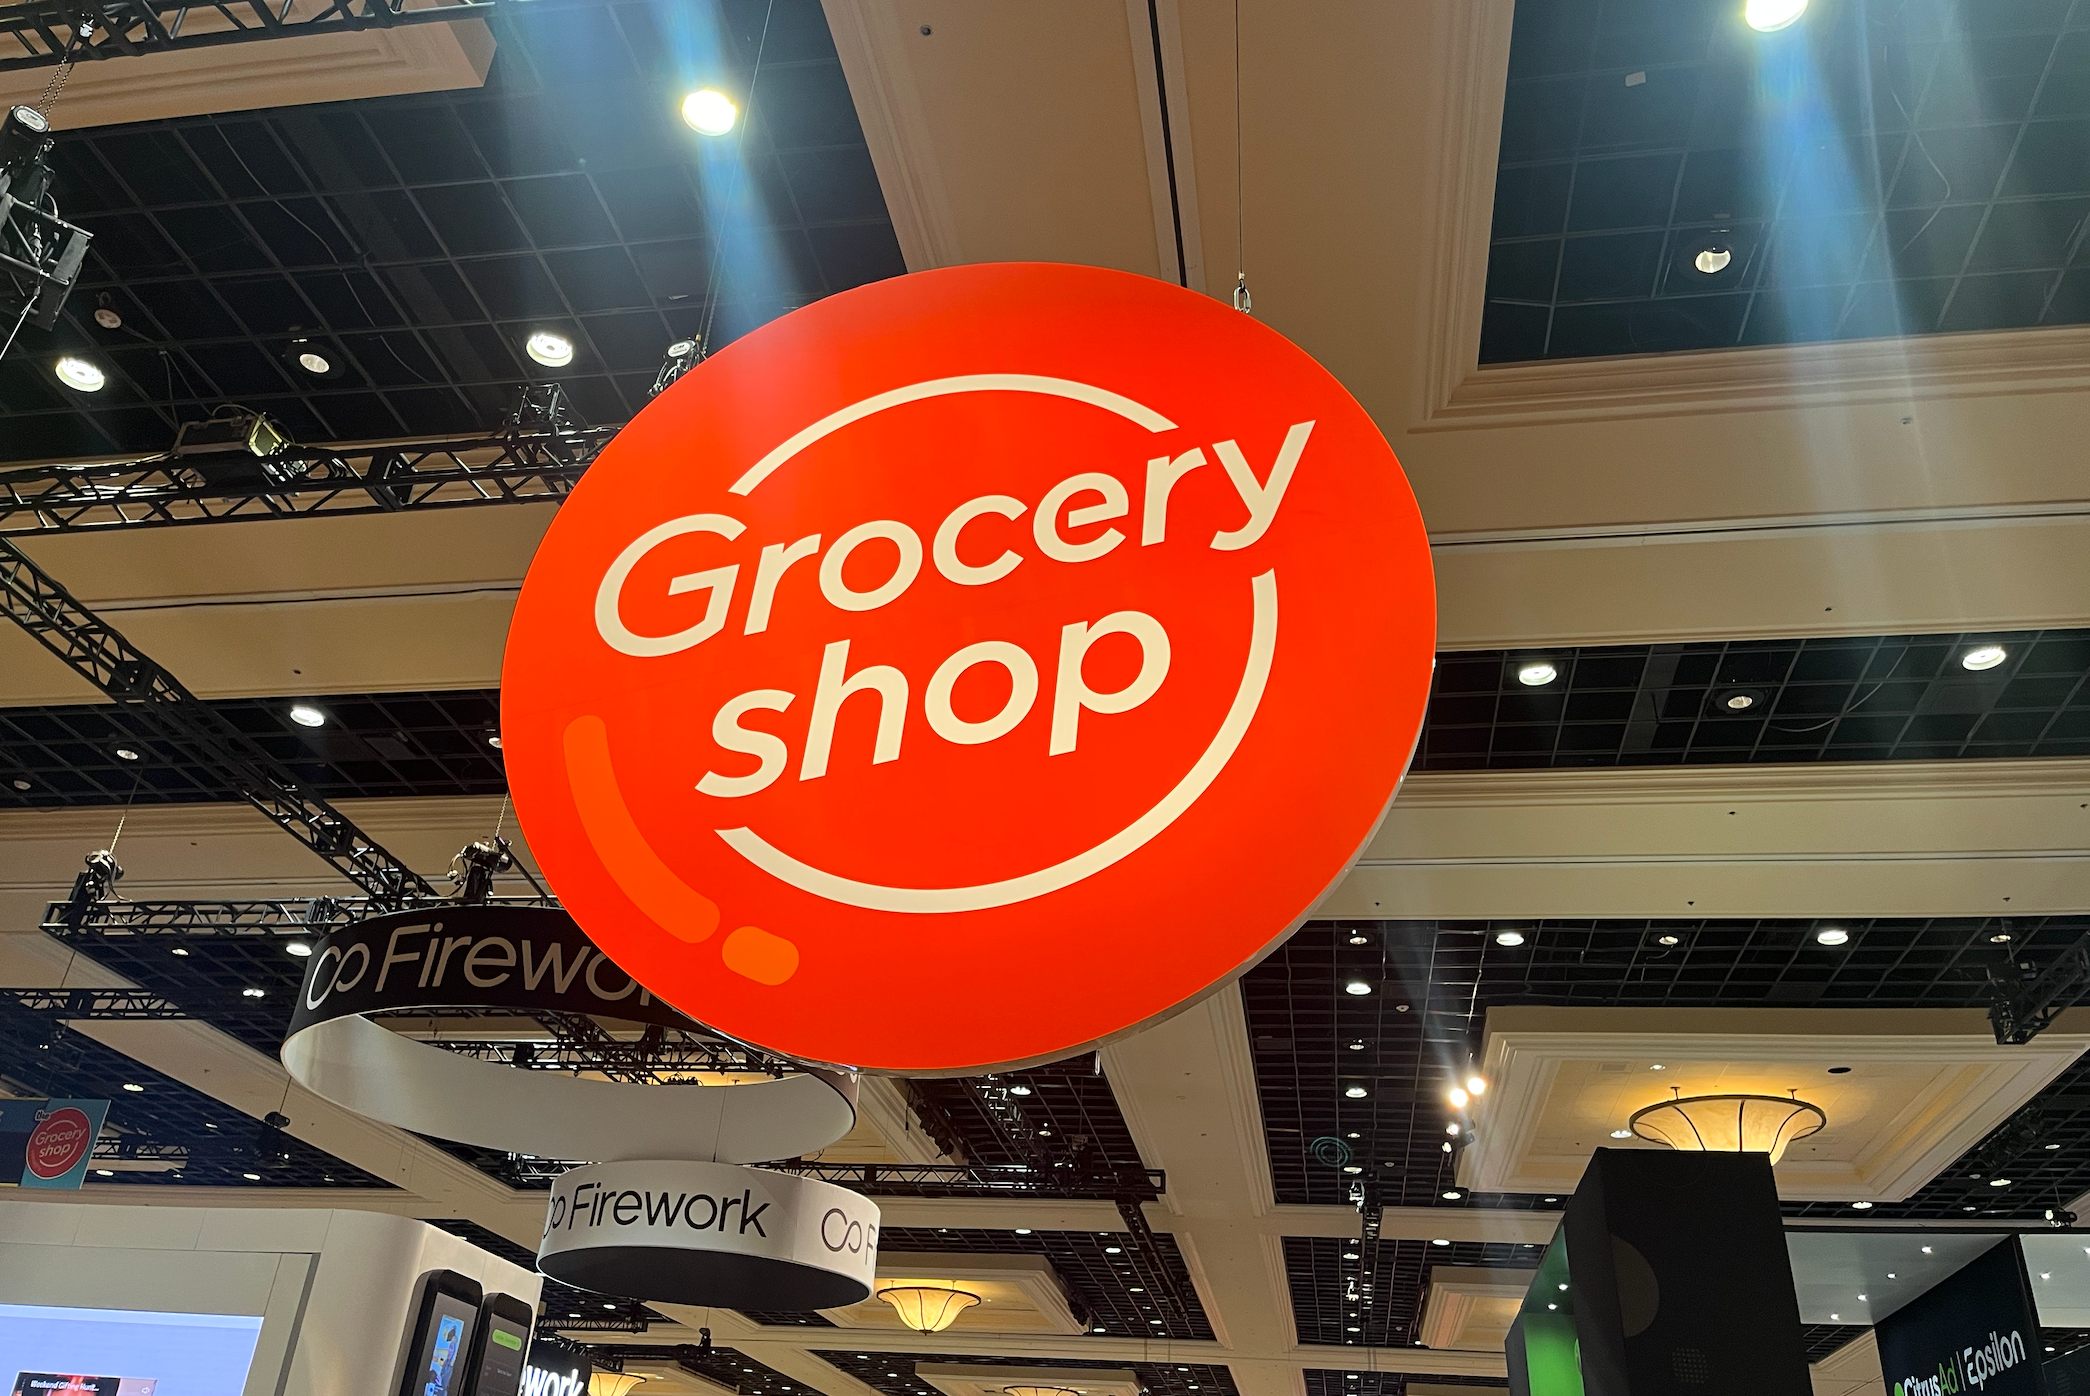 Groceryshop sign in a conference hall.